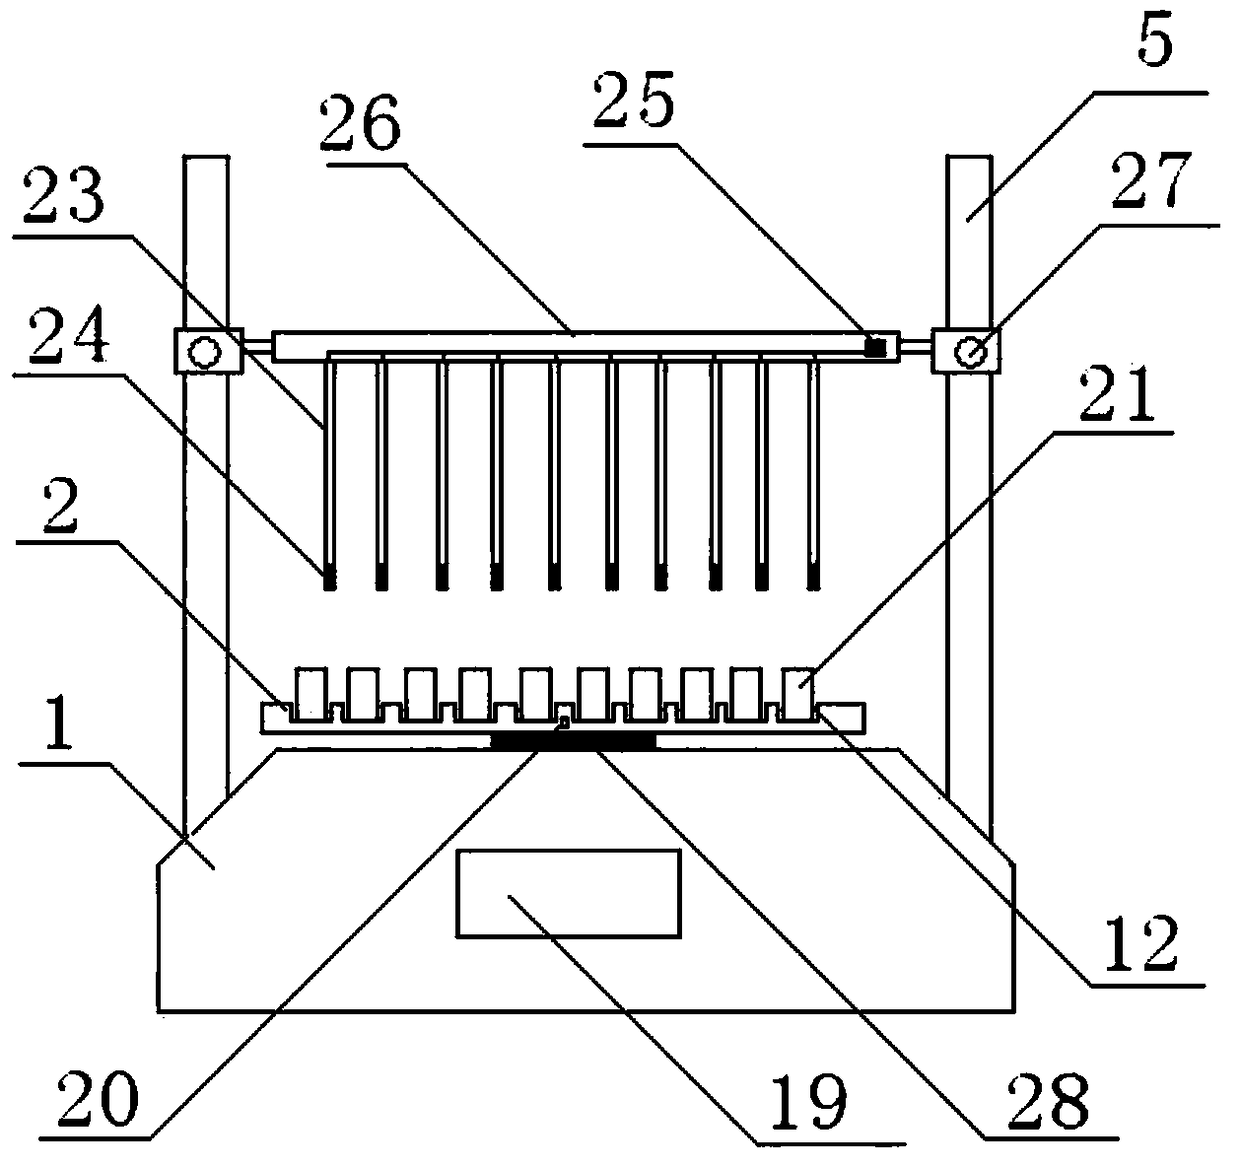 A high-throughput magnetic extraction and enrichment device and enrichment method